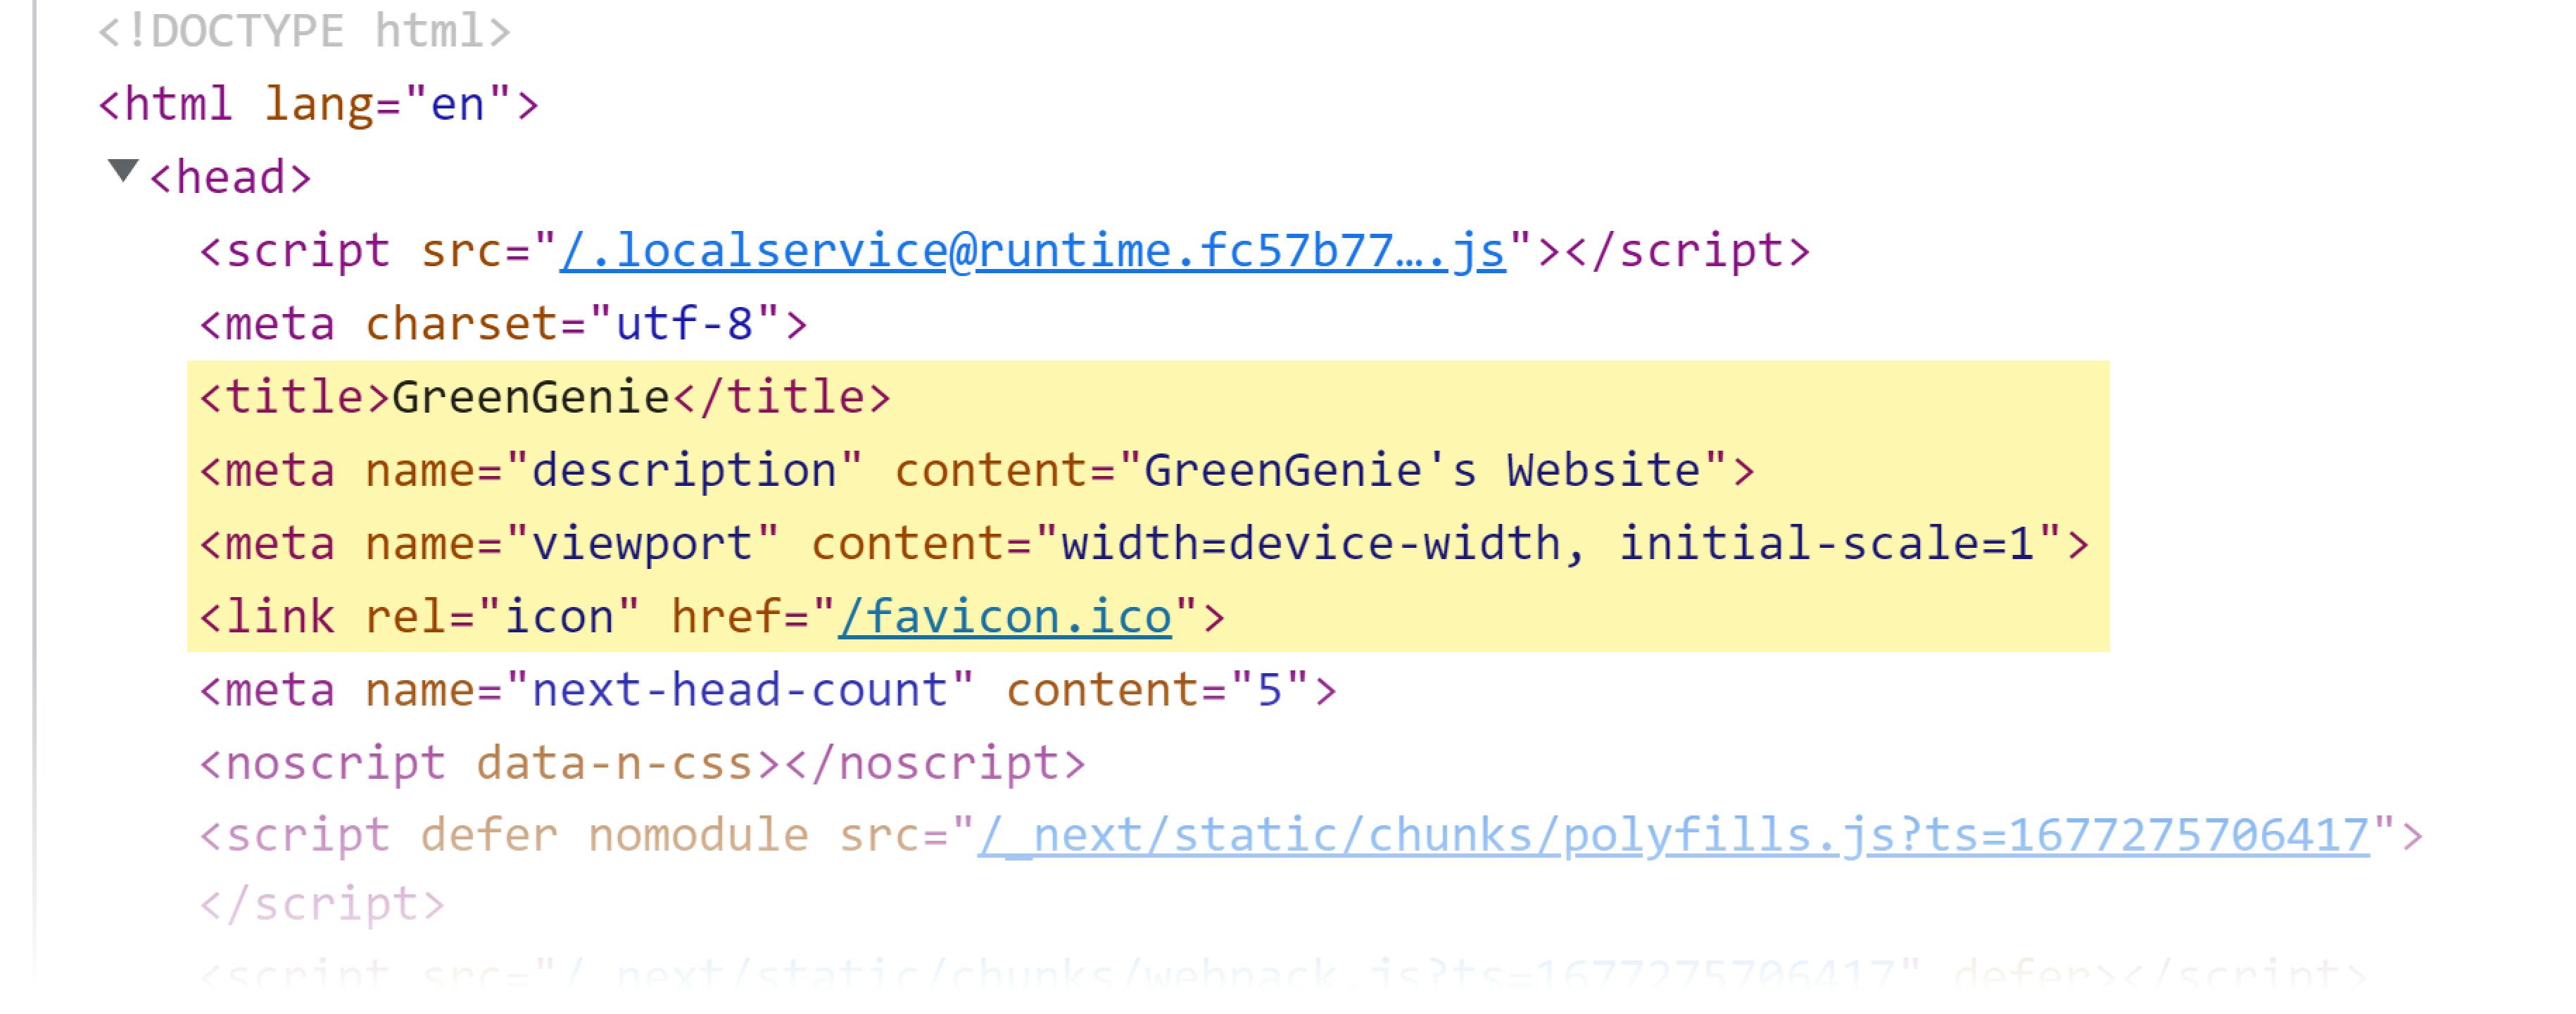 The title, meta description, viewport metadata, and favicon tags are lifted into the head of an HTML document.